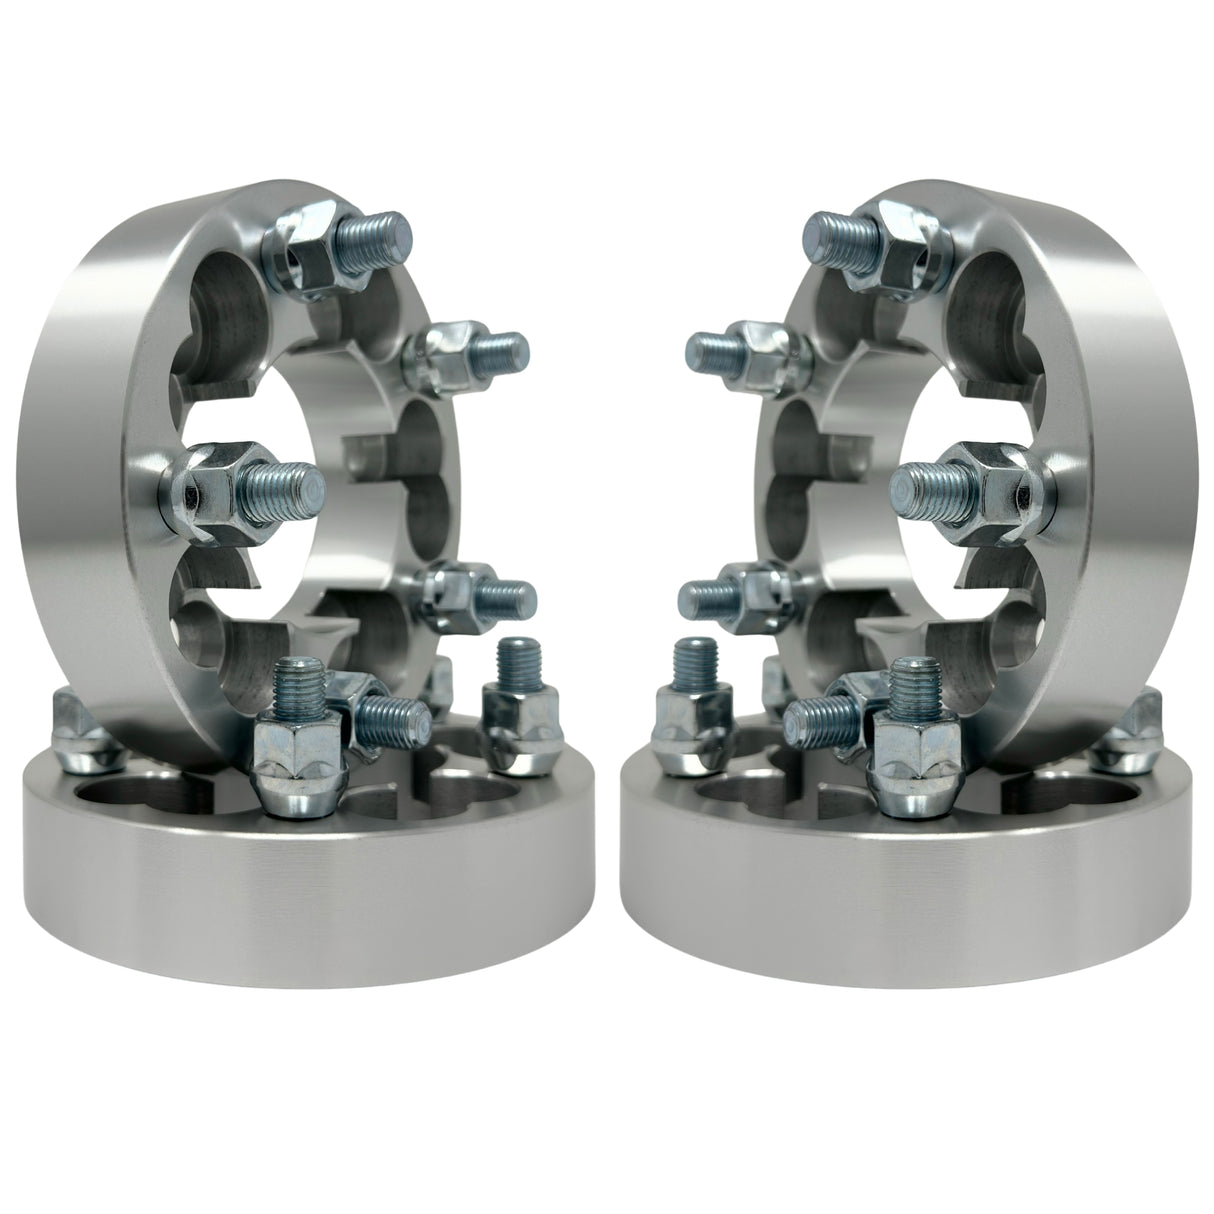 5x100 or 5x108 to 5x114.3 Wheel Adapters Universal Kit 1.25" Inch (32mm) 12x1.5 Studs & Lug Nuts 74mm Center Bore | 5x100 or 5x4.25 to 5x4.5